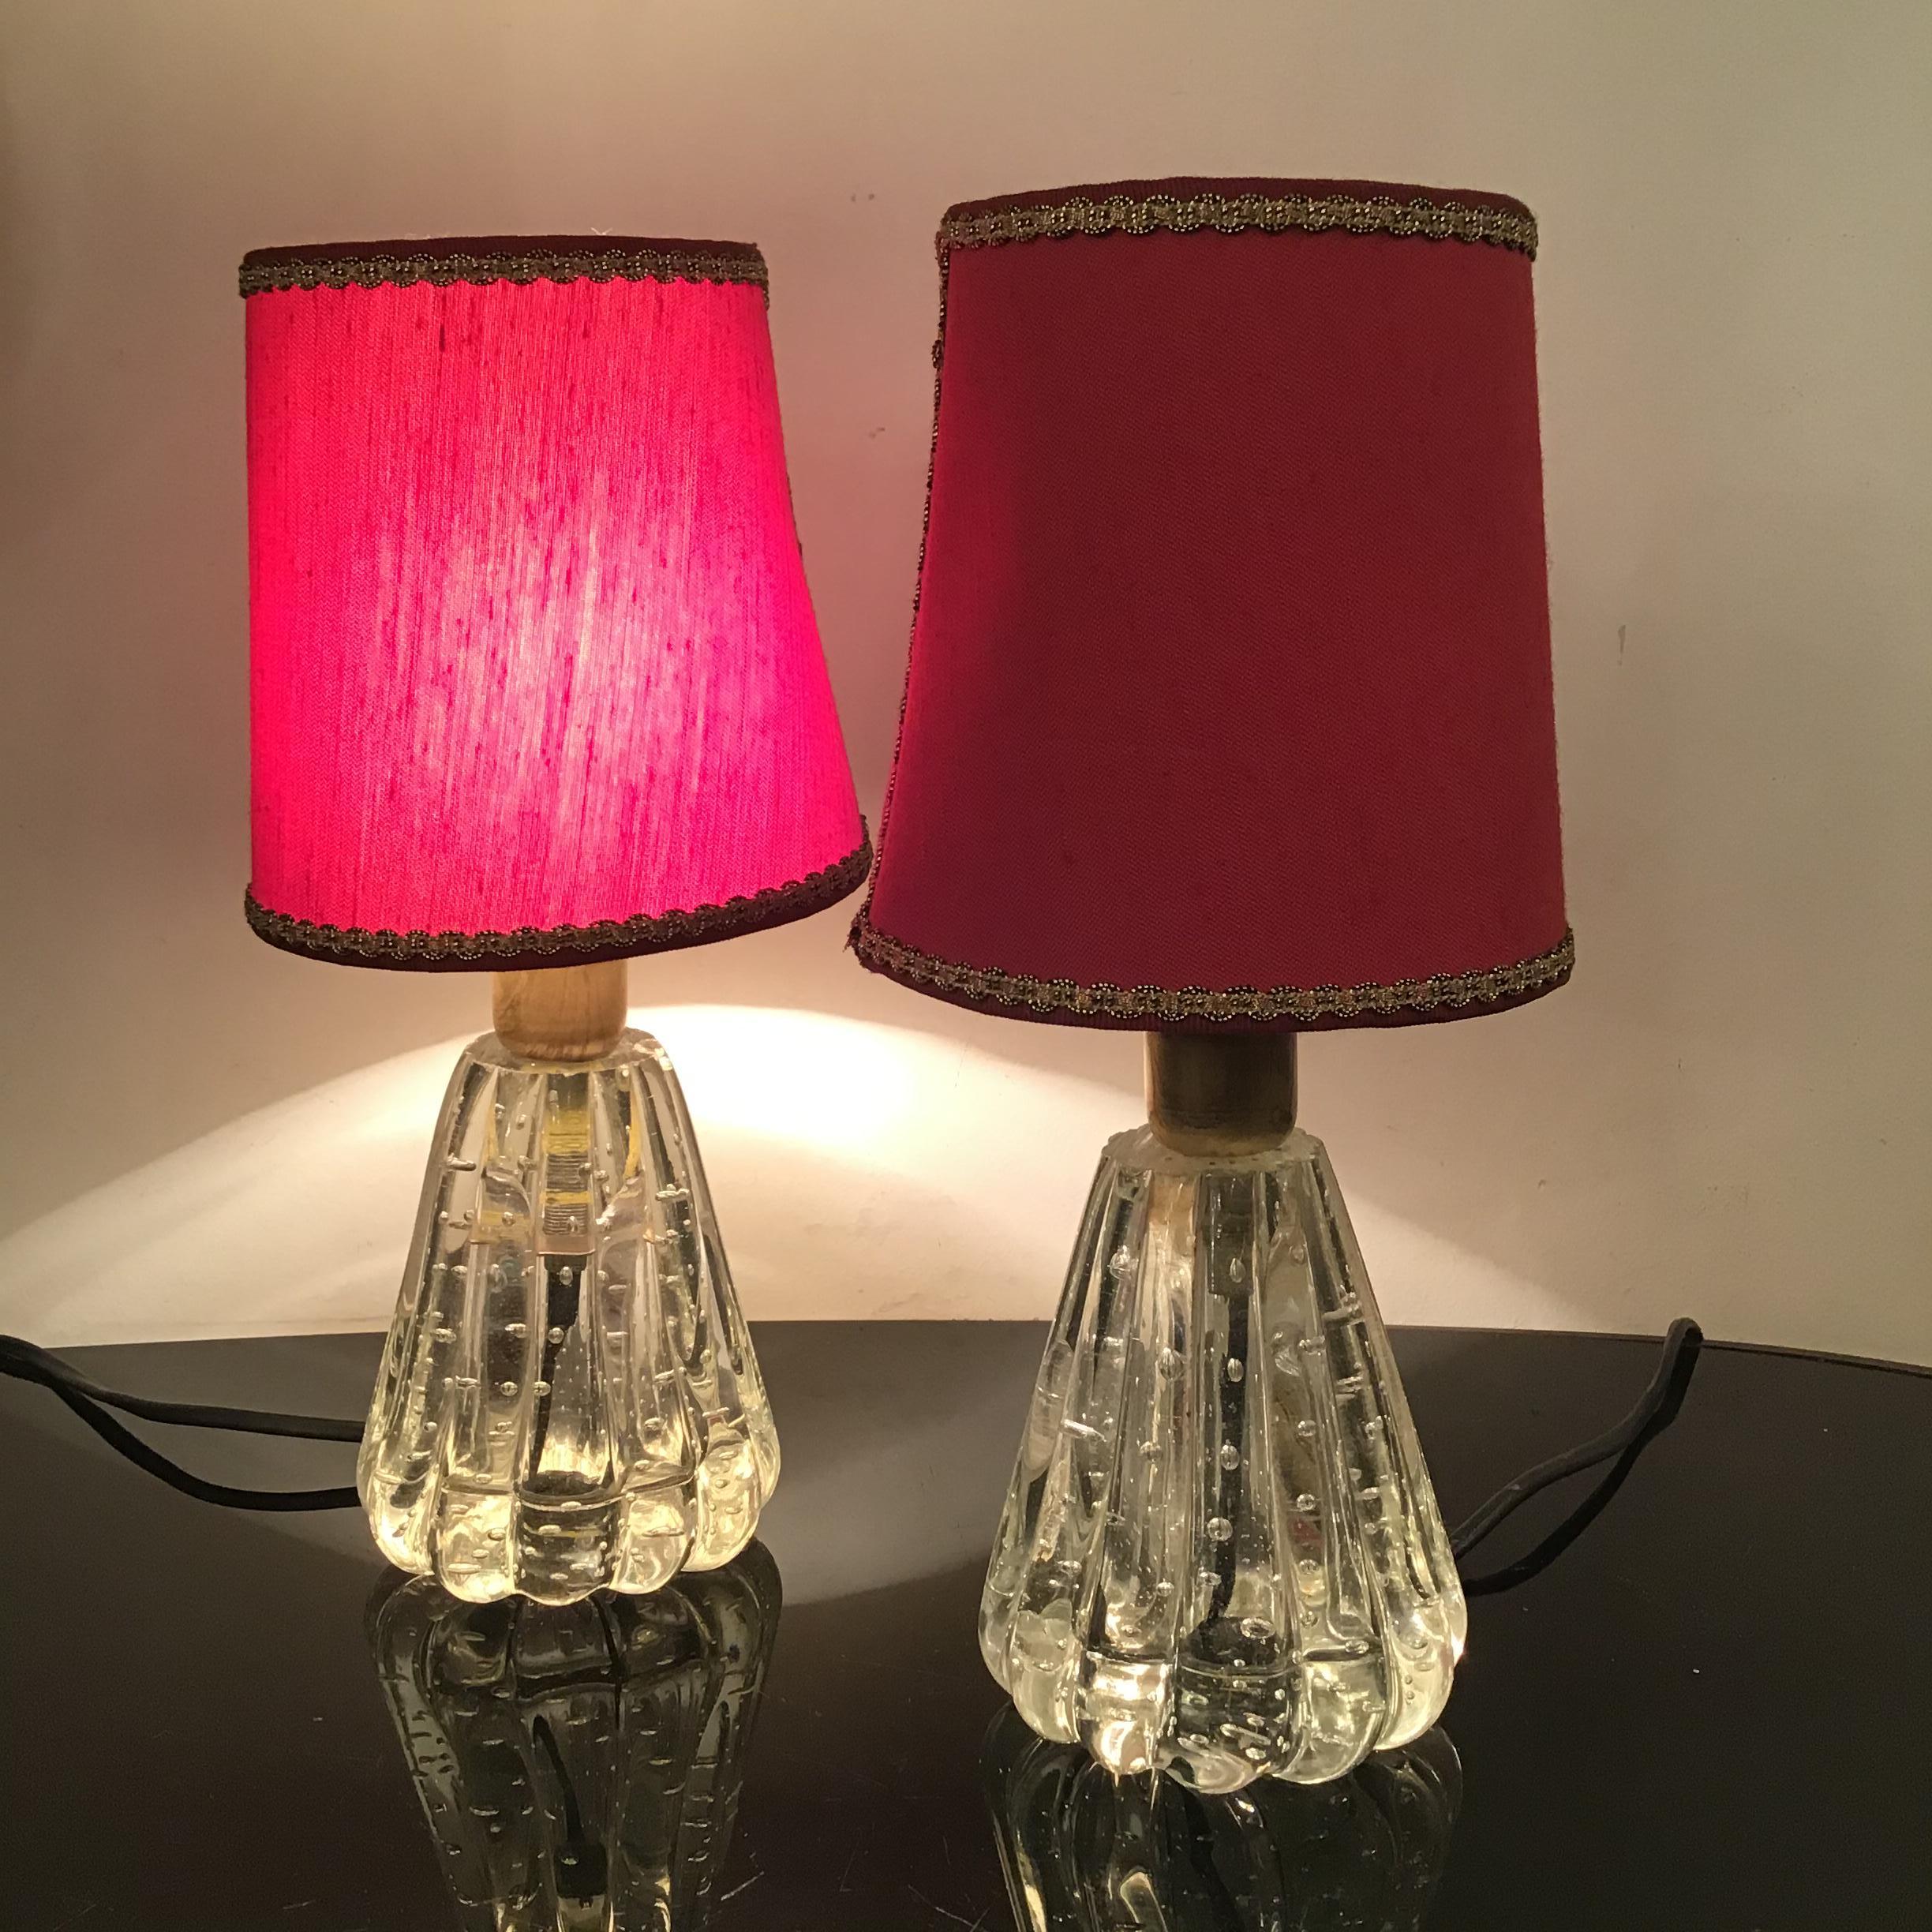 Barovier e Toso Table Lamps Murano Glass Brass Fabric Lampshade 1940 Italy For Sale 2